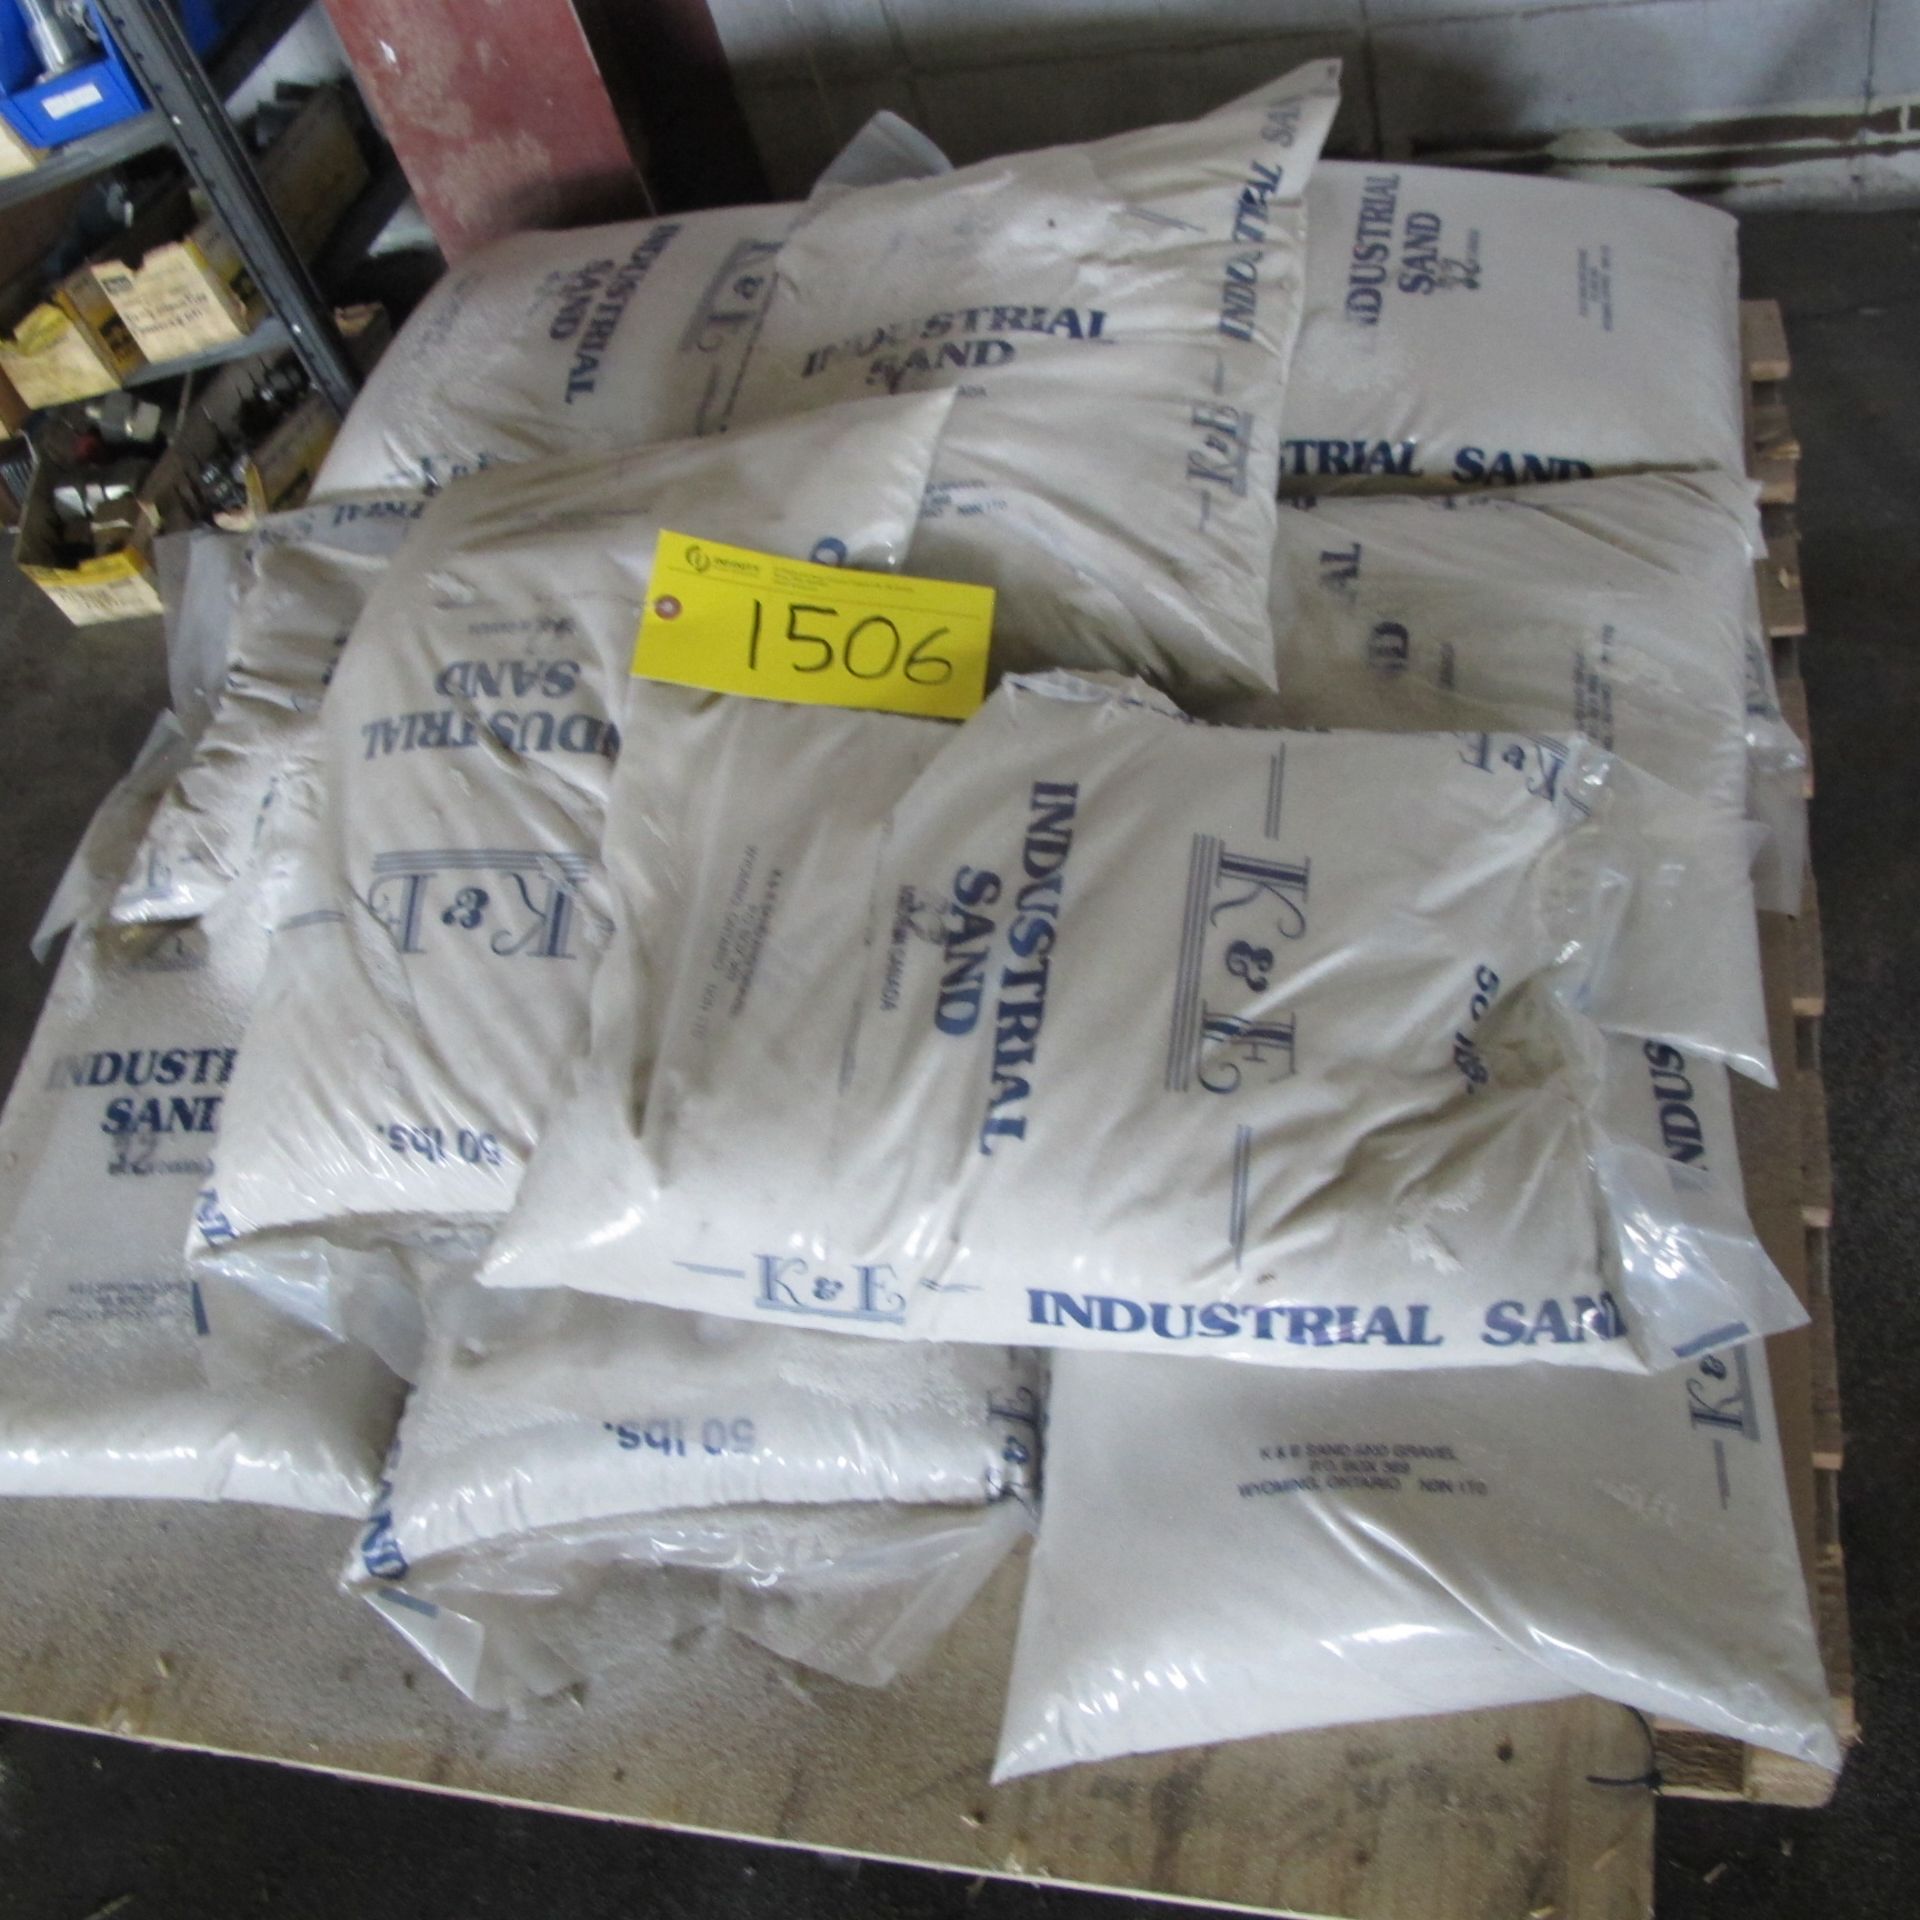 LOT OF K+E INDUSTRIAL SAND - 50LB BAGS